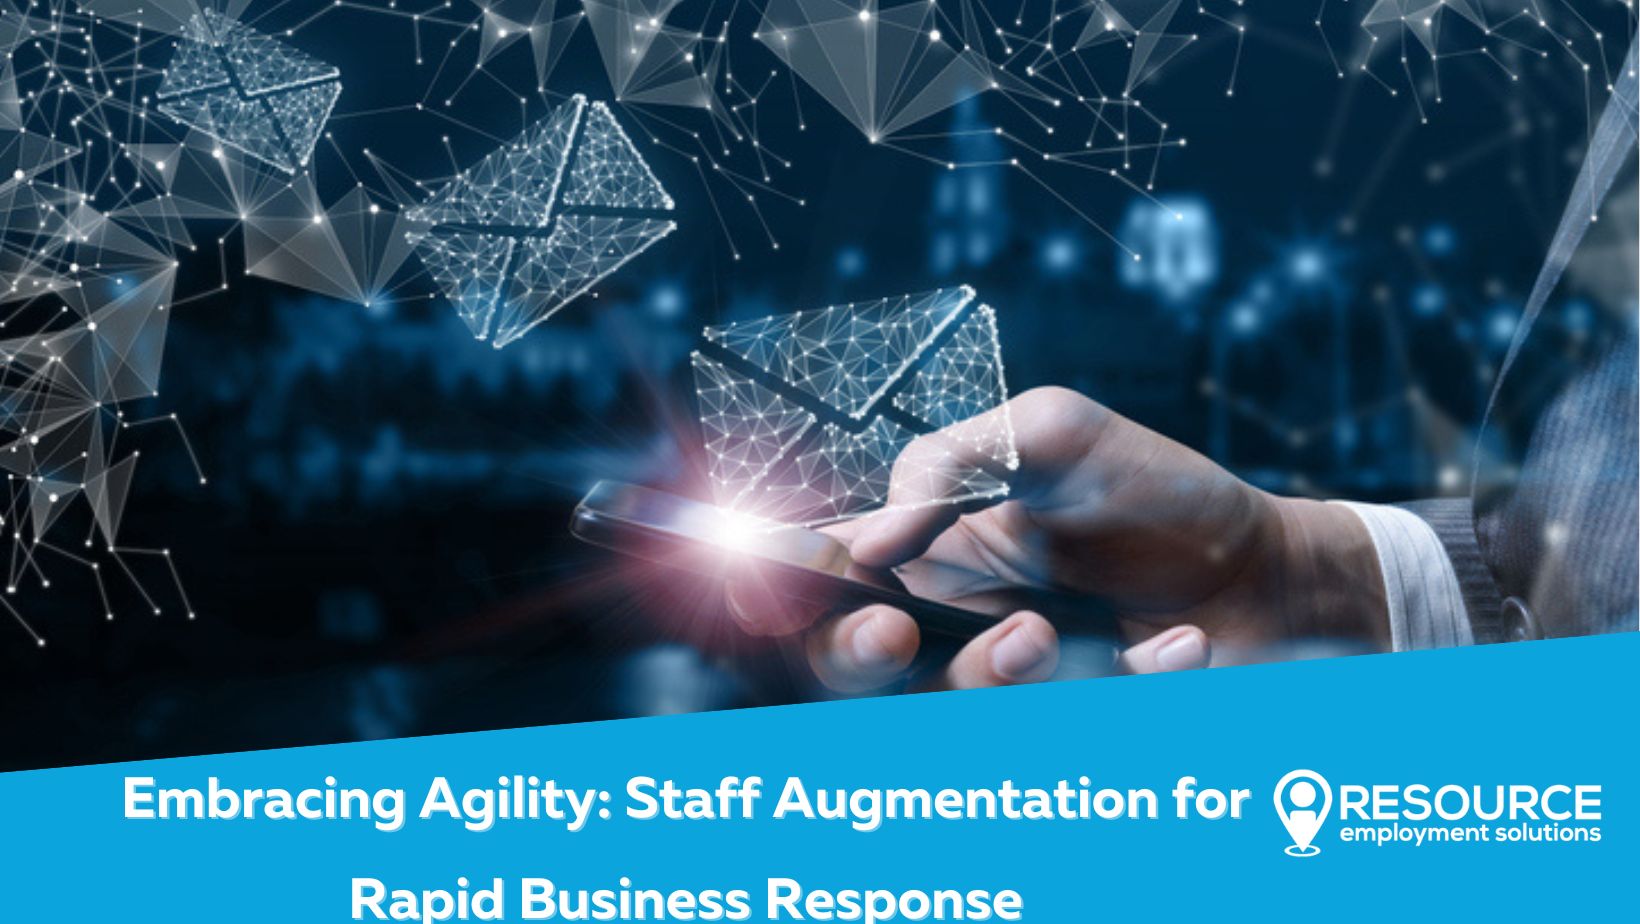 Embracing Agility: Staff Augmentation for Rapid Business Response